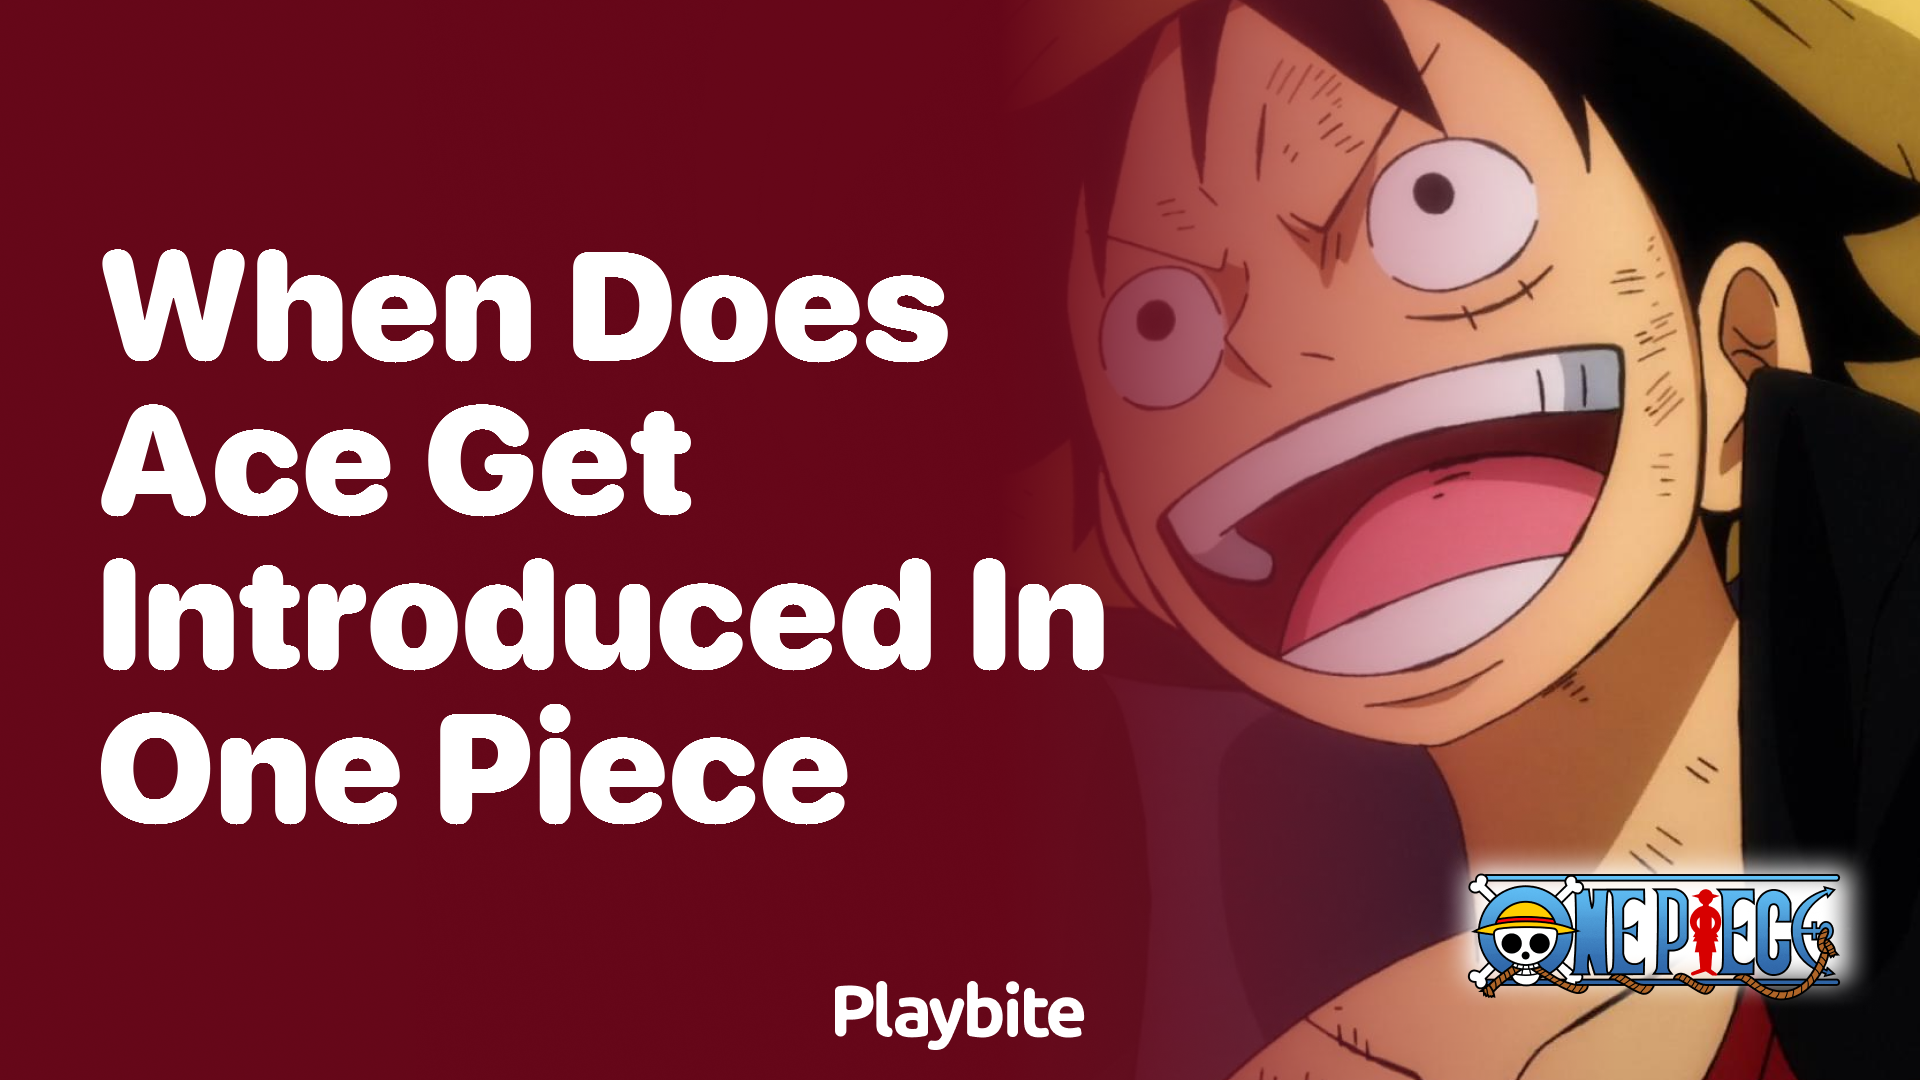 When does Ace get introduced in One Piece?